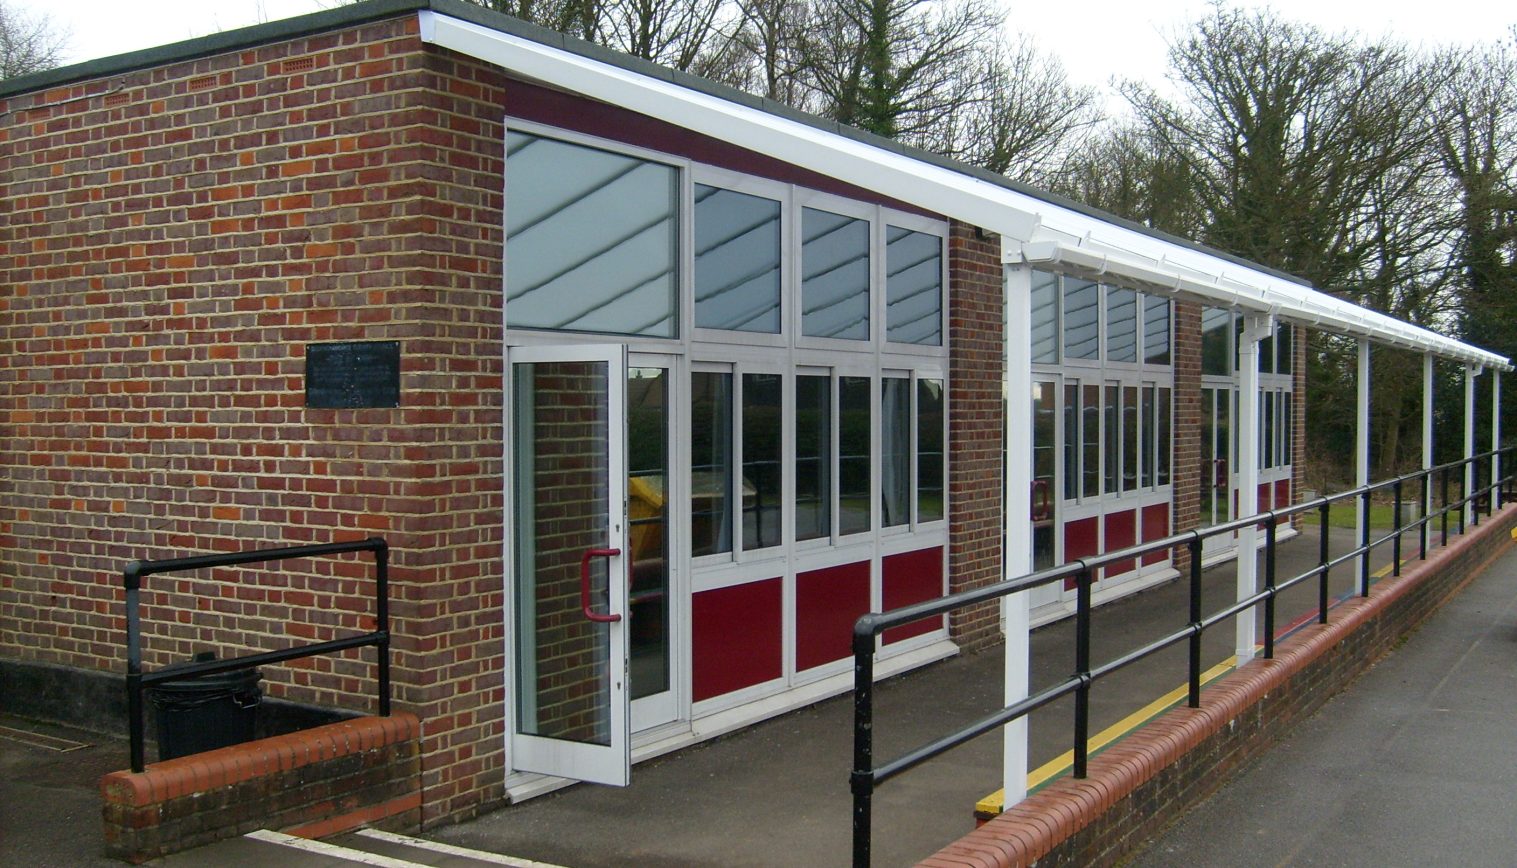 Curzon CE Combined School – Second Installation